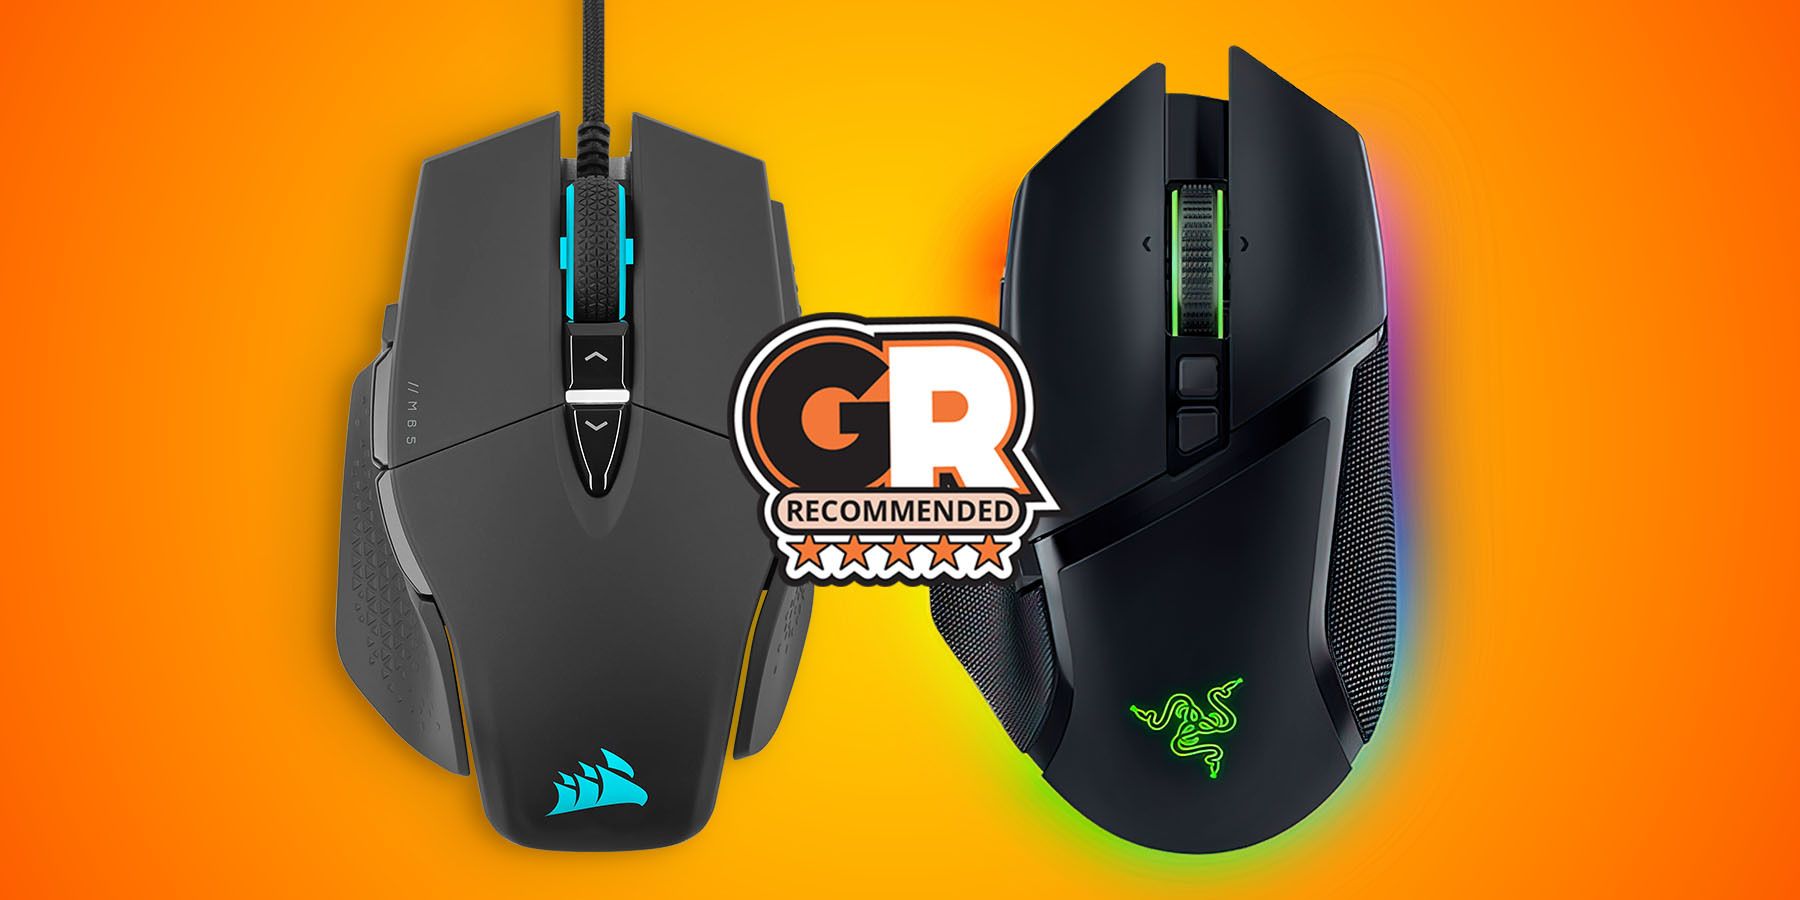 Wired vs. Wireless Mouse: Which Is Better For Gaming?